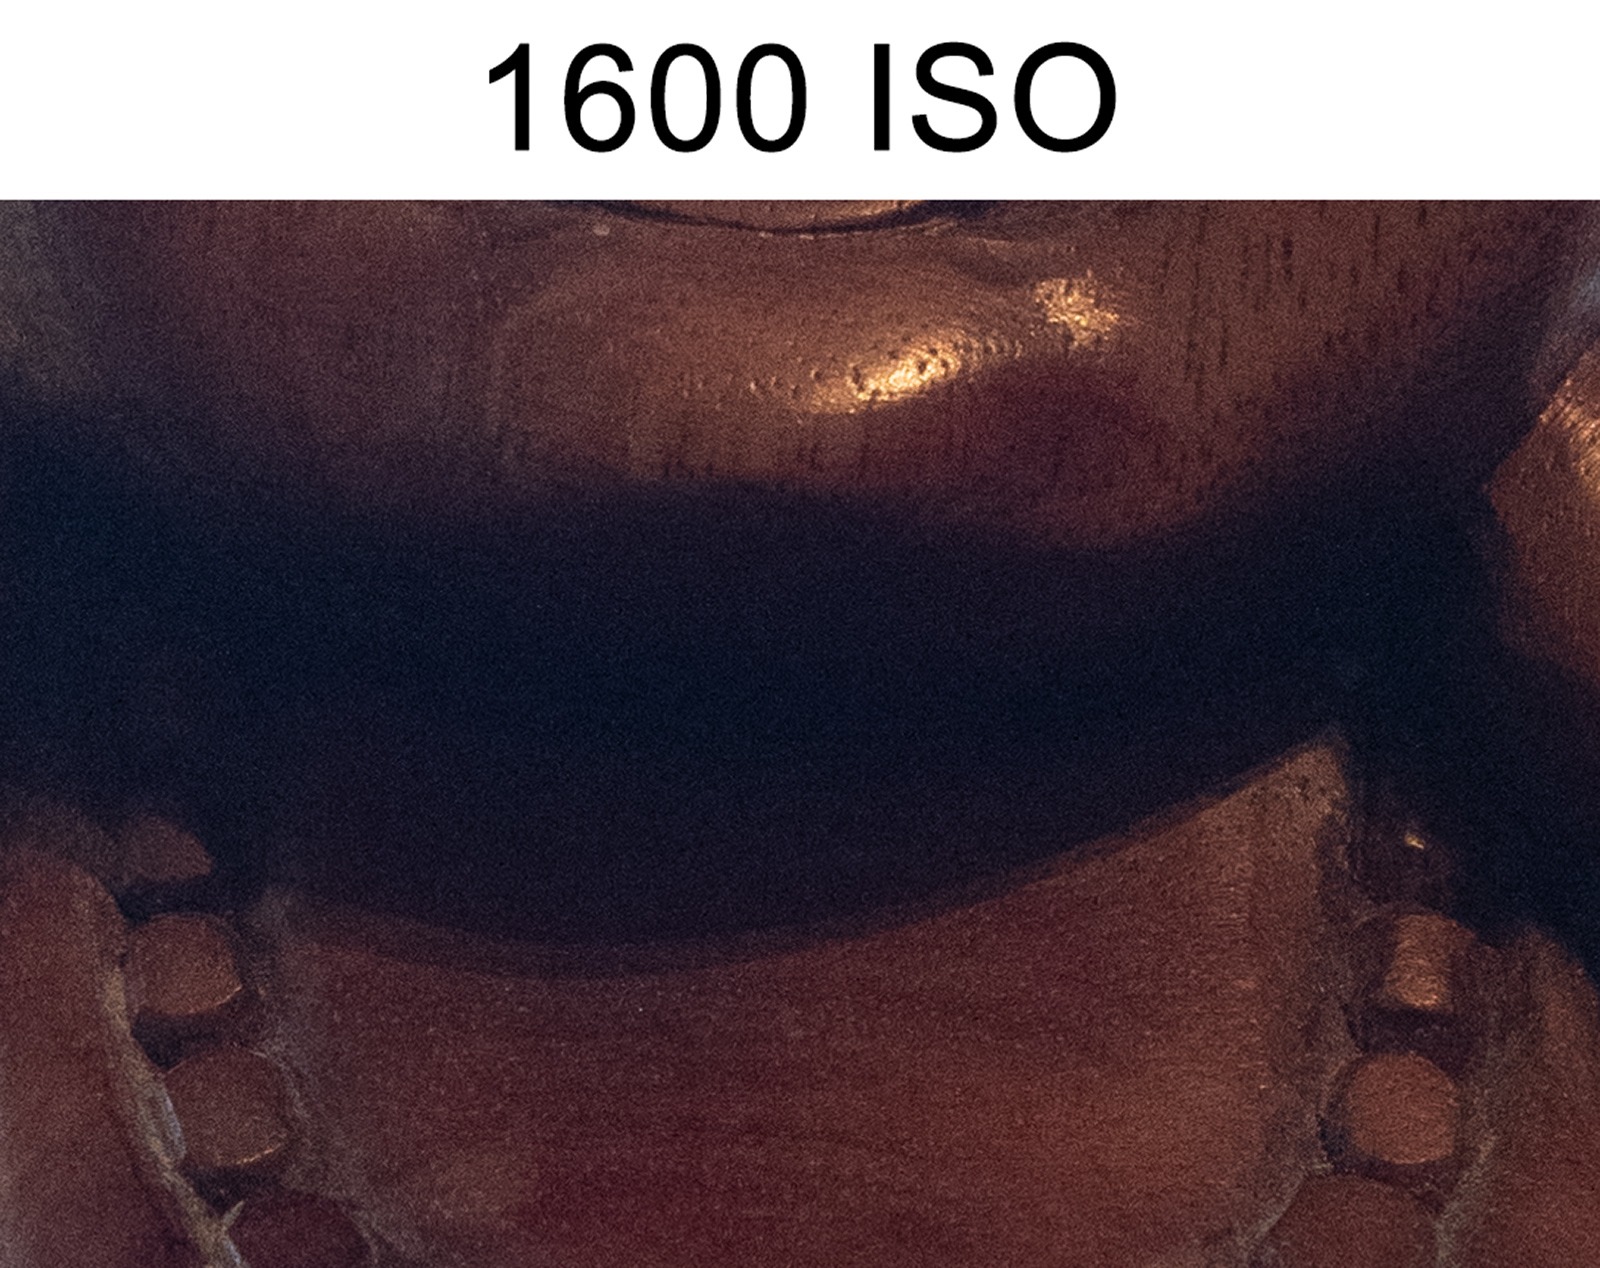 1600 iso